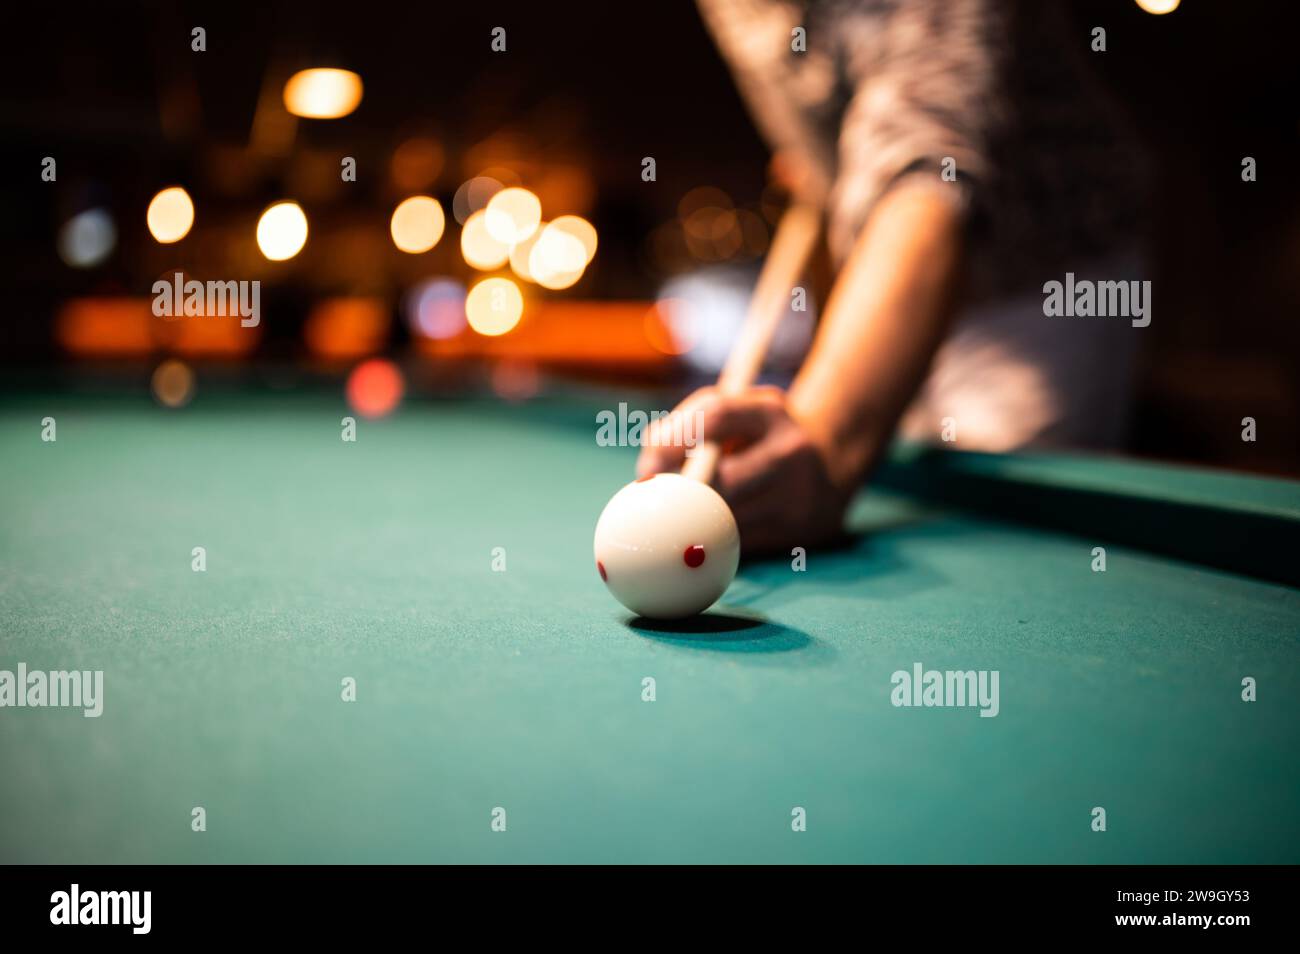 Young man playing snooker, aiming. for a good shot Stock Photo